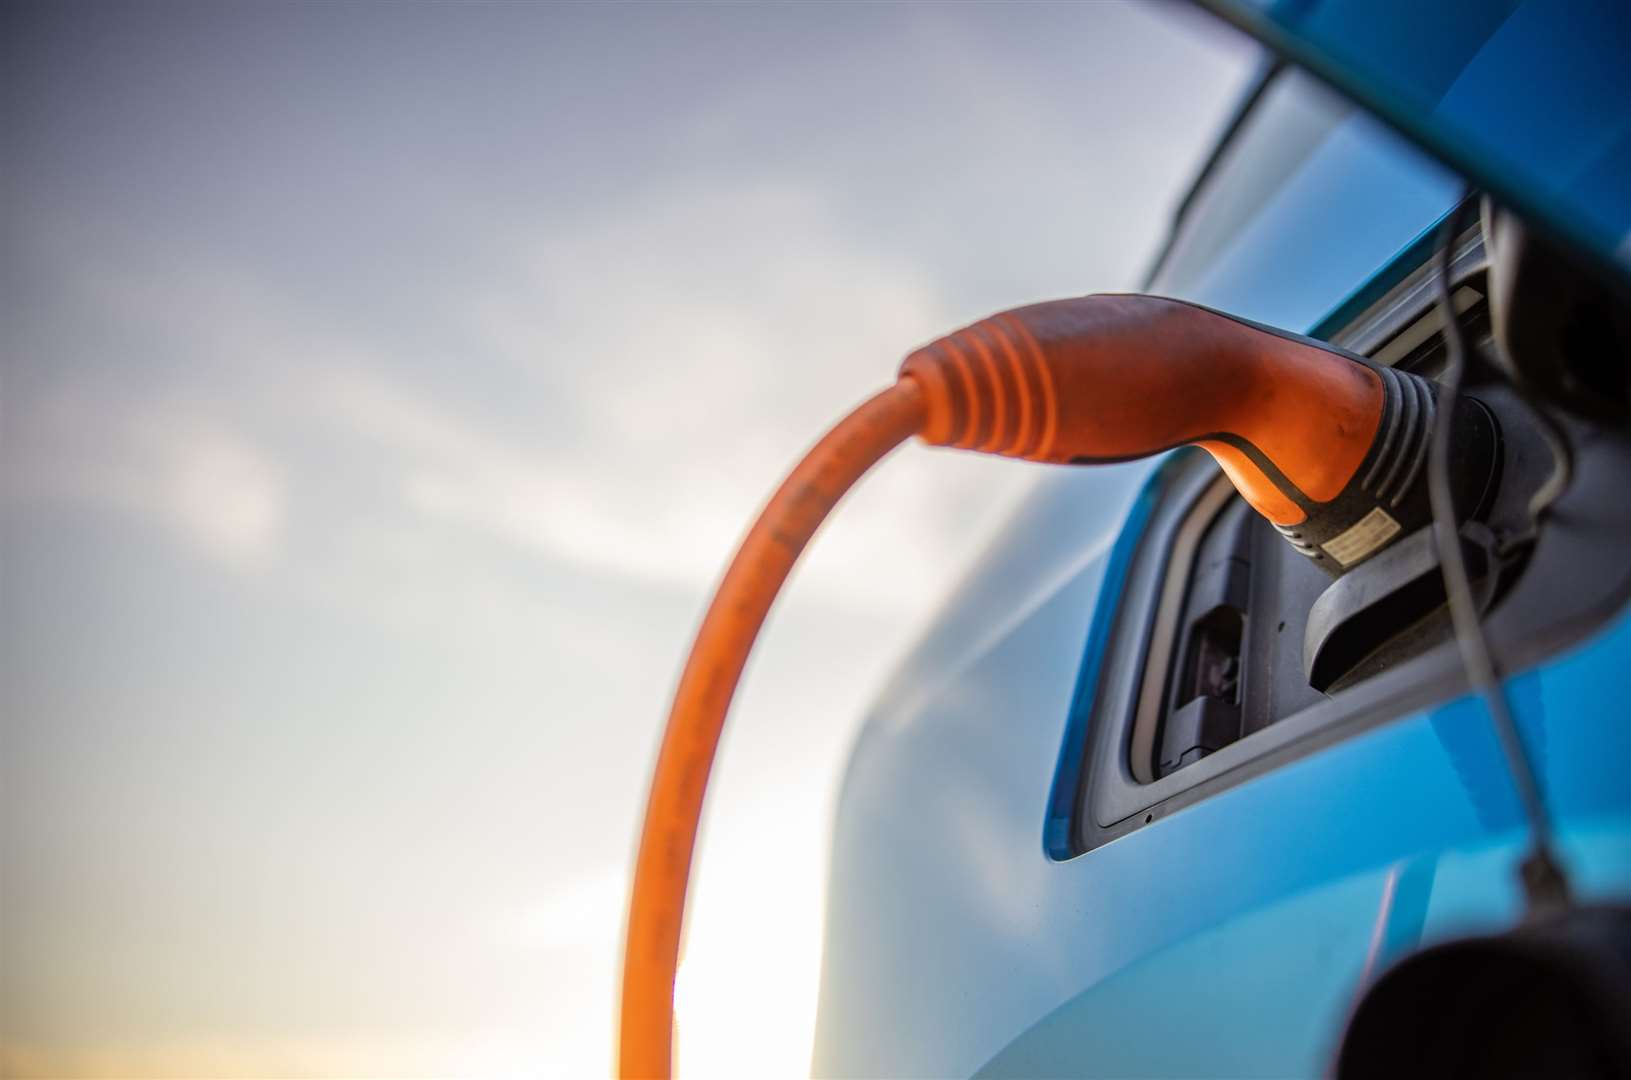 The switch to net-zero will alter demand for fuel says the report. Image: iStock.